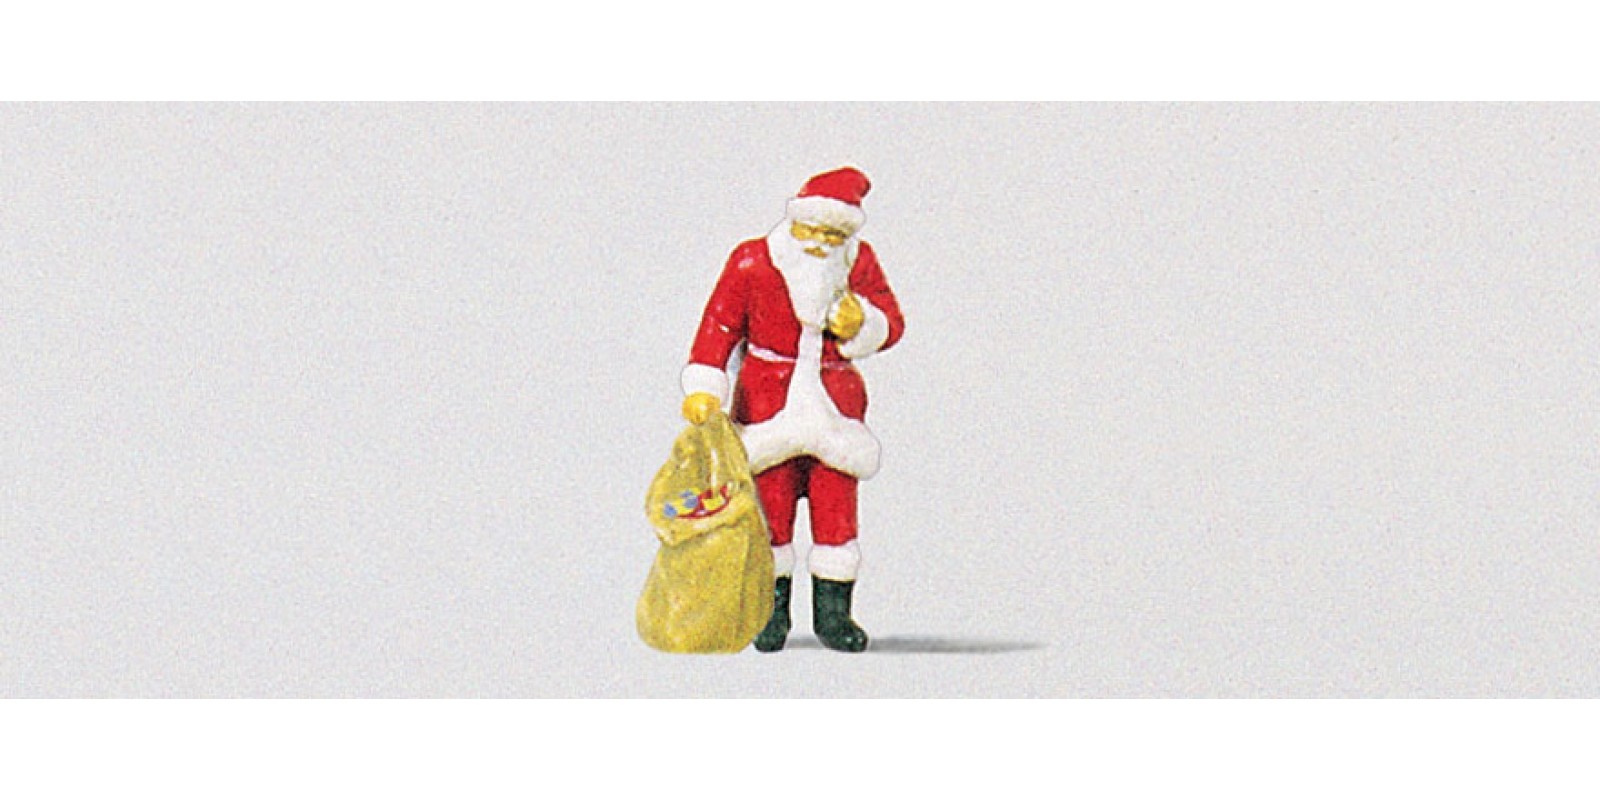 PR29027 Santa Claus with sack of gifts